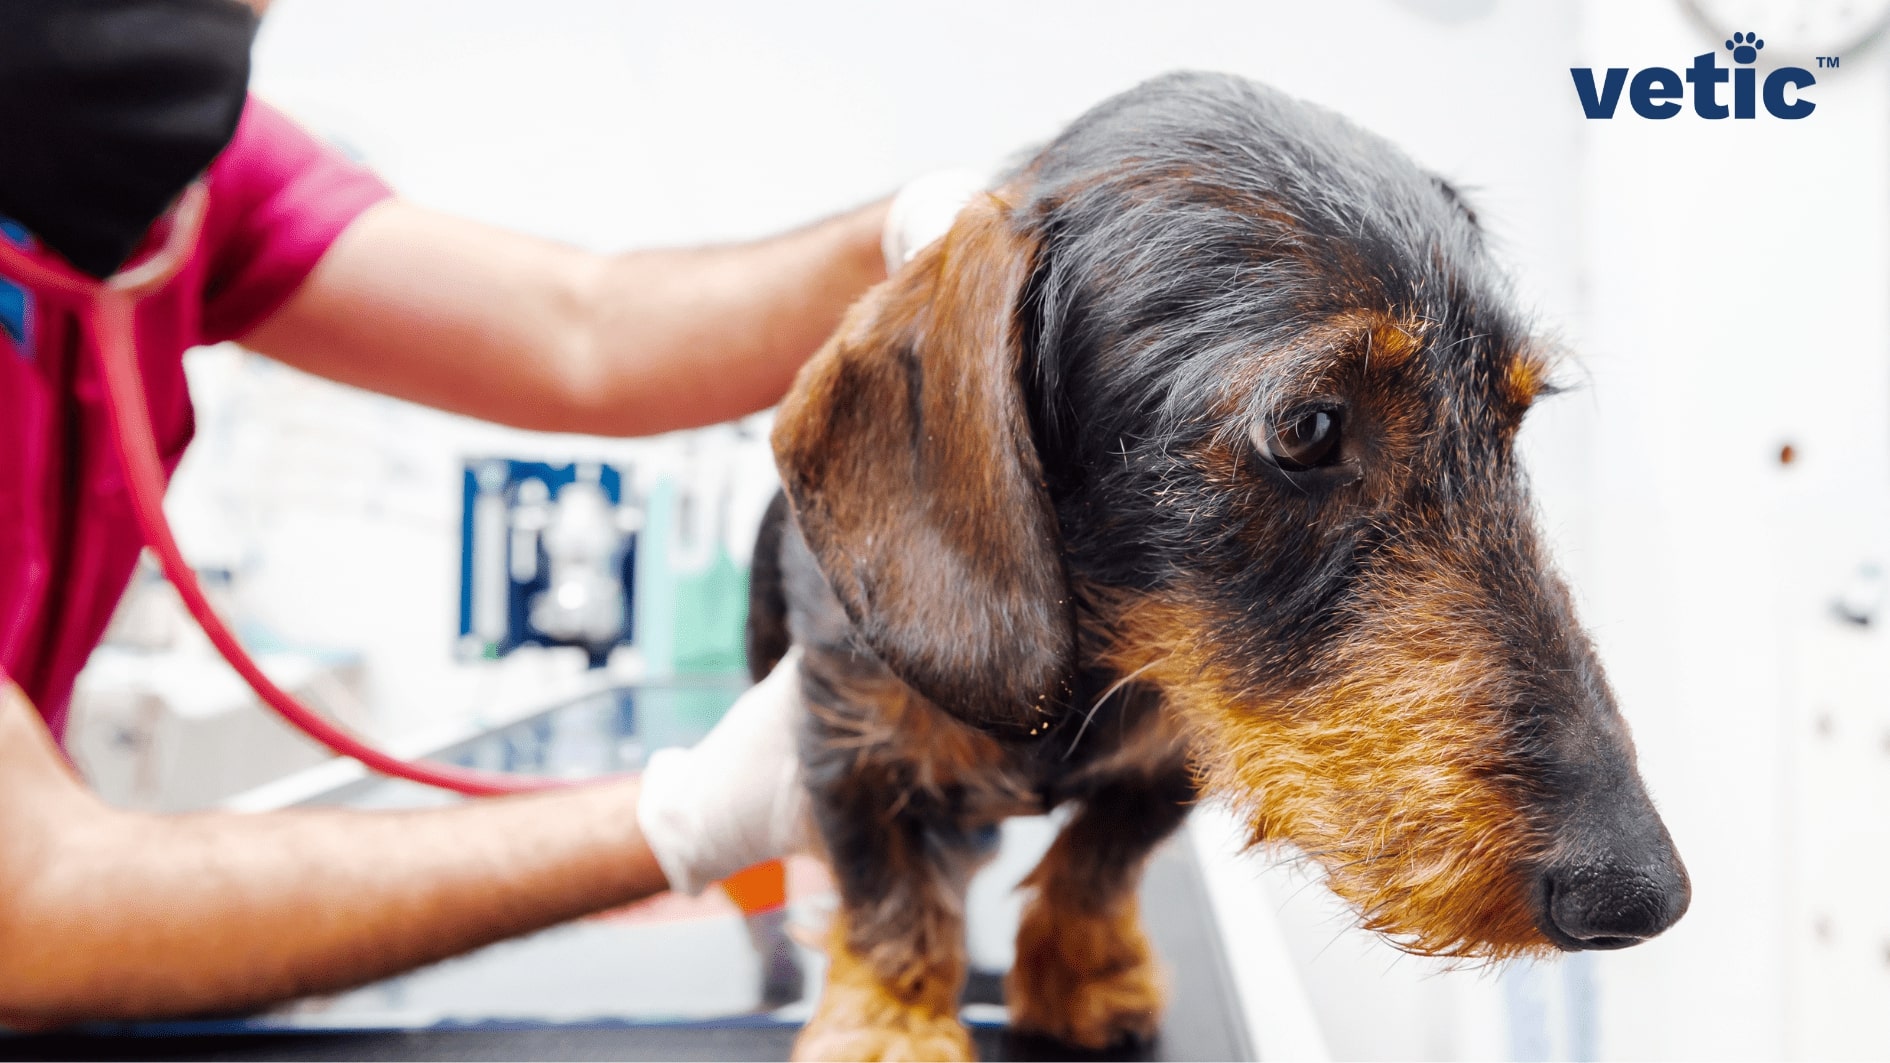 long-haired Dachshund undergoing physical checkup with a stethoscope at a veterinary clinic.